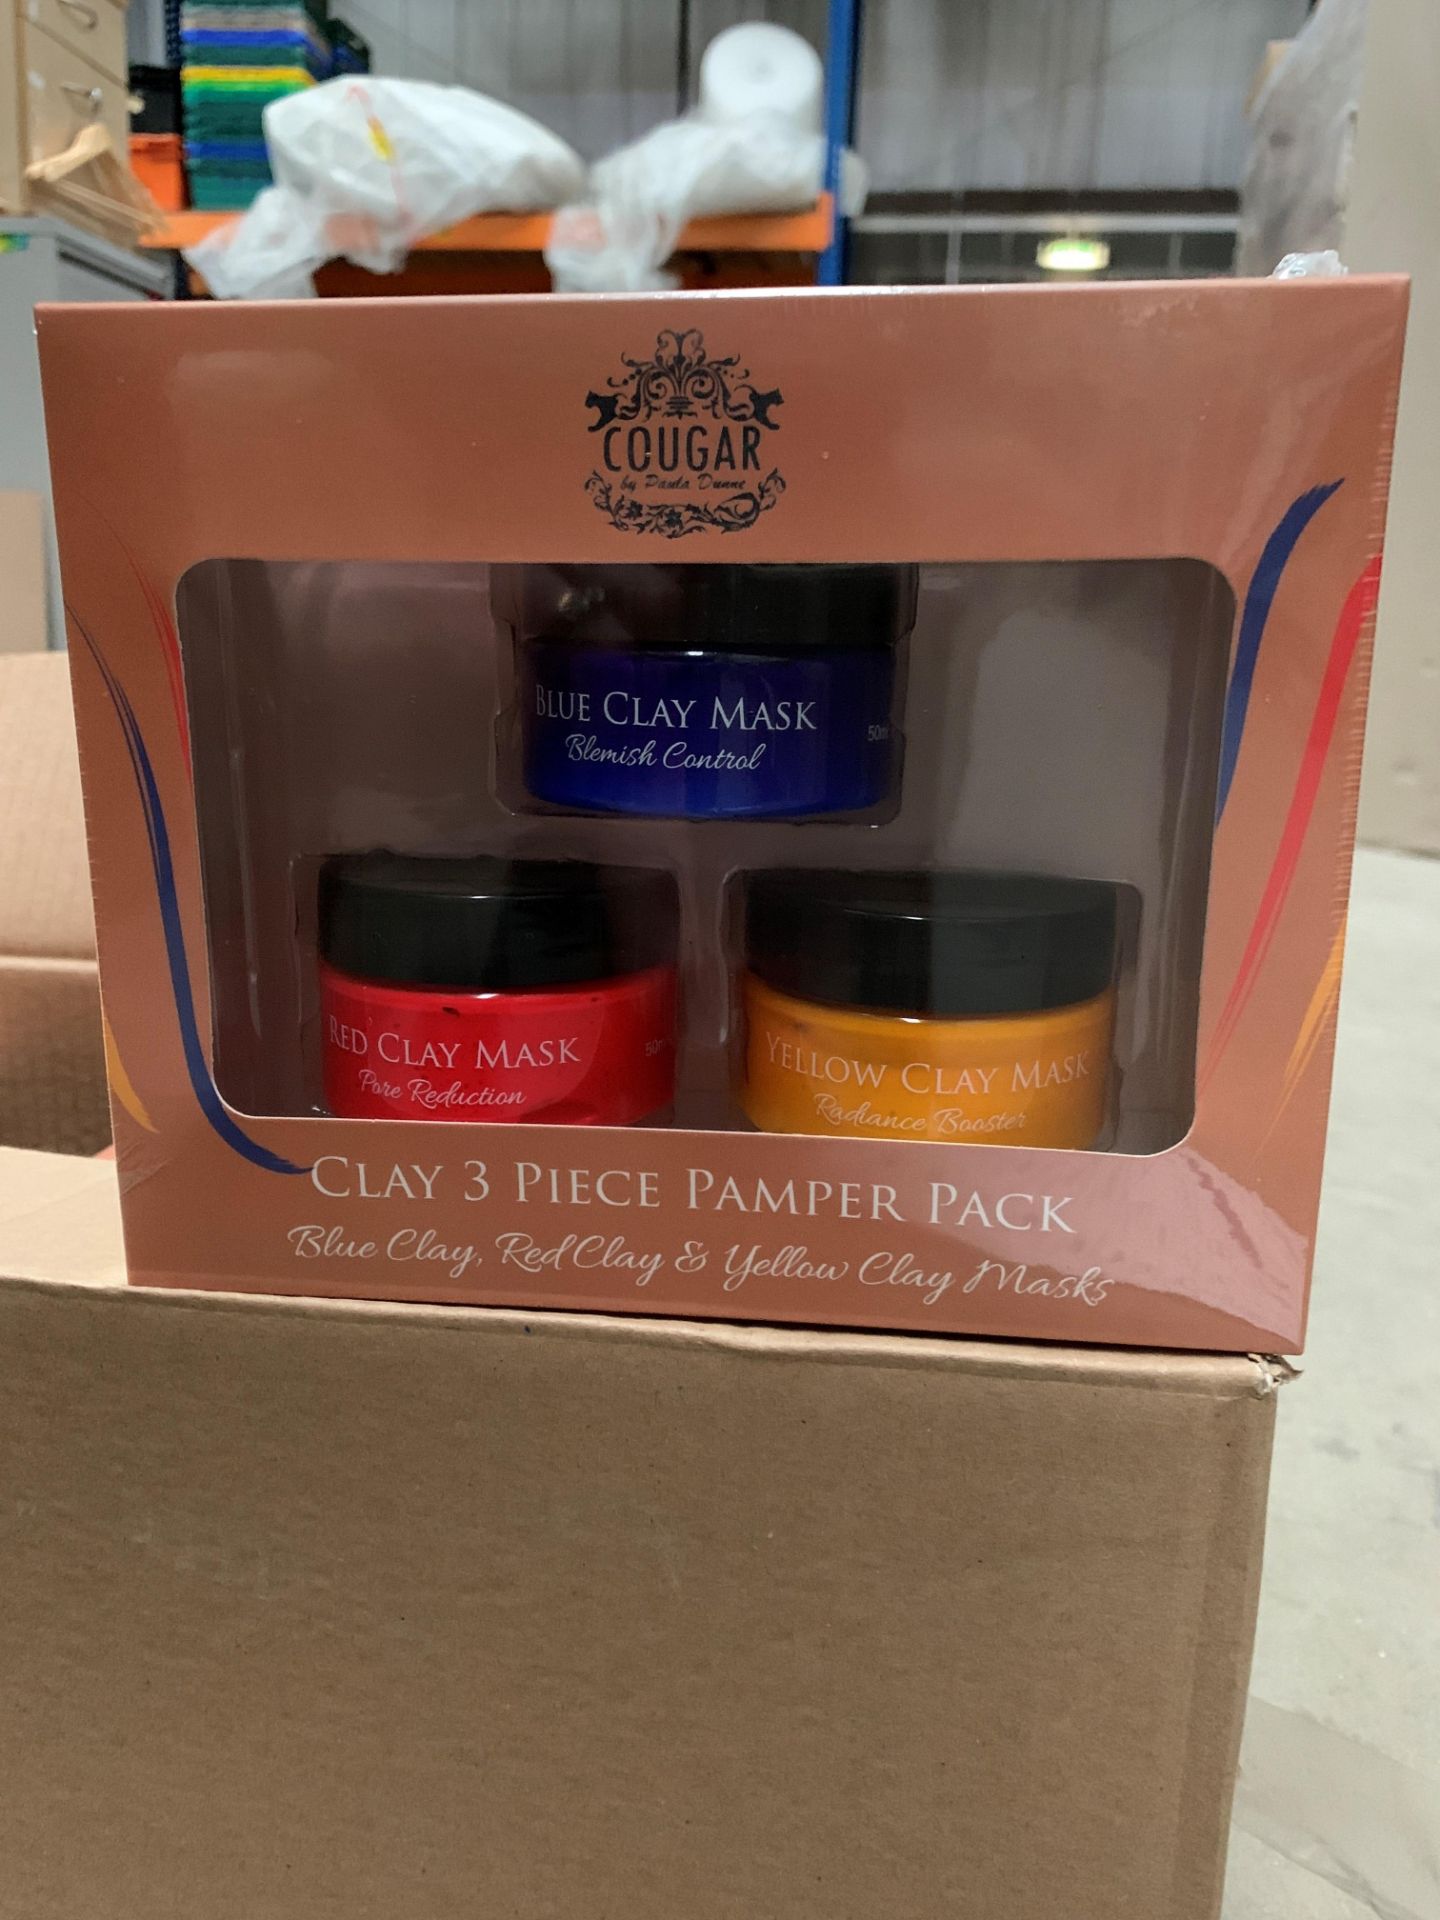 6 x Cougar clay 3 piece pamper packs - 3 x 50ml jars per pack (1 x outer box).